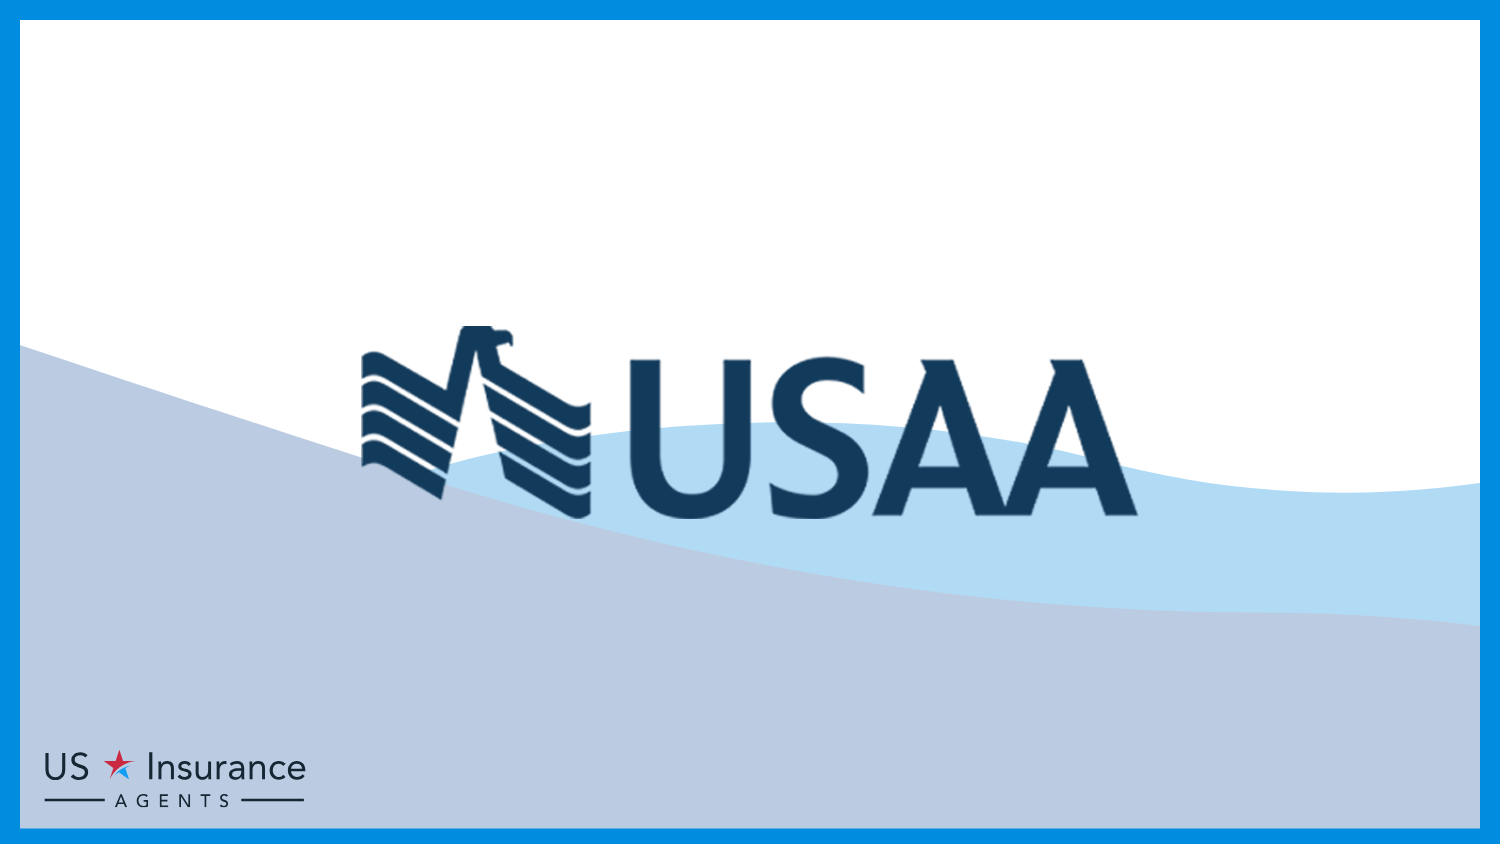 Best Car Insurance for Firefighters: USAA